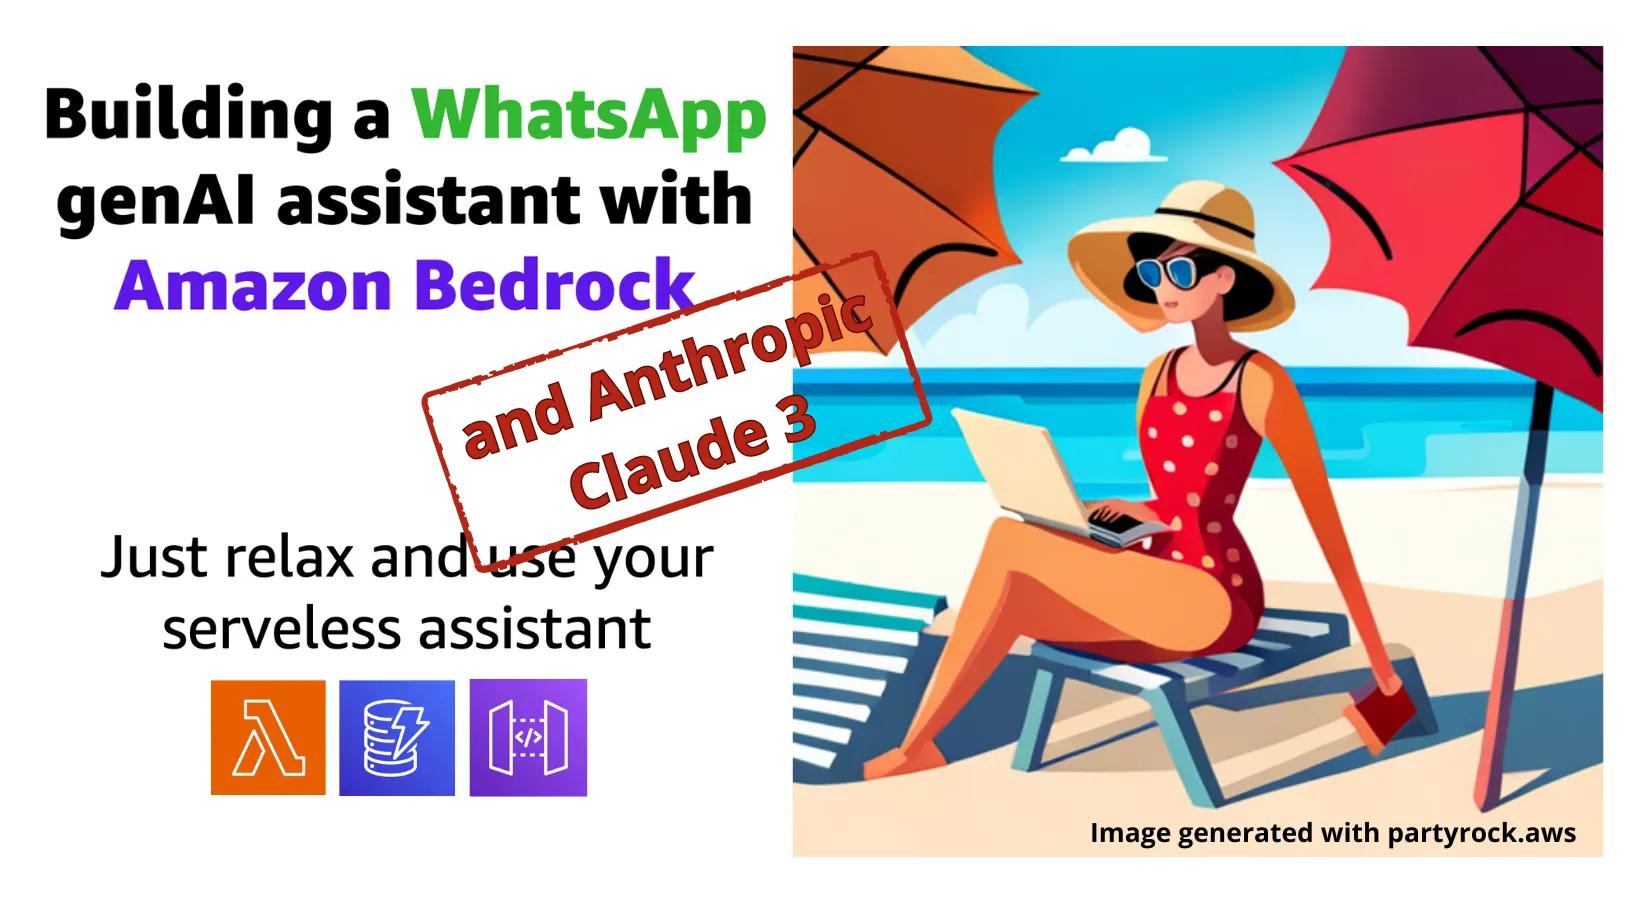 Building a WhatsApp genAI Assistant with Amazon Bedrock and Claude 3